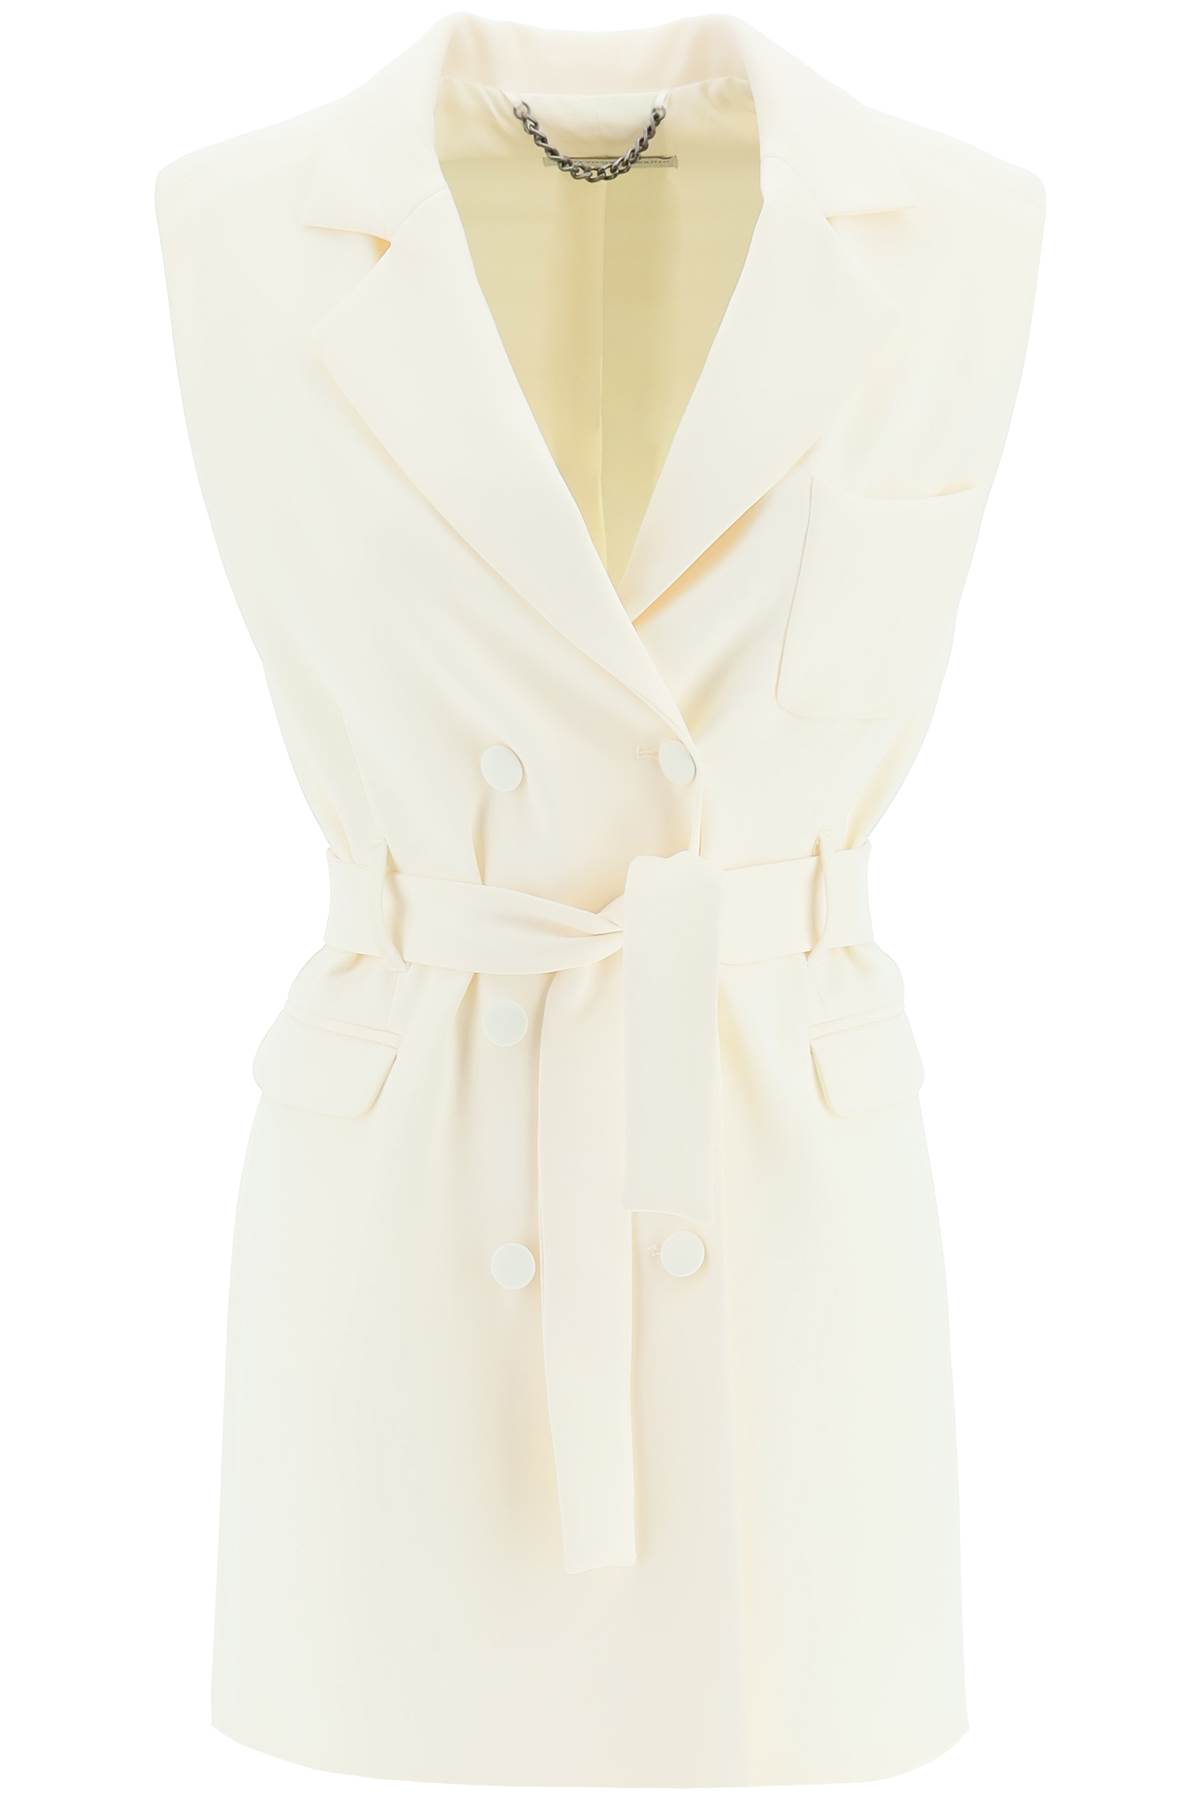 MVP WARDdressing gown CABANA DOUBLE BREASTED MINI DRESS